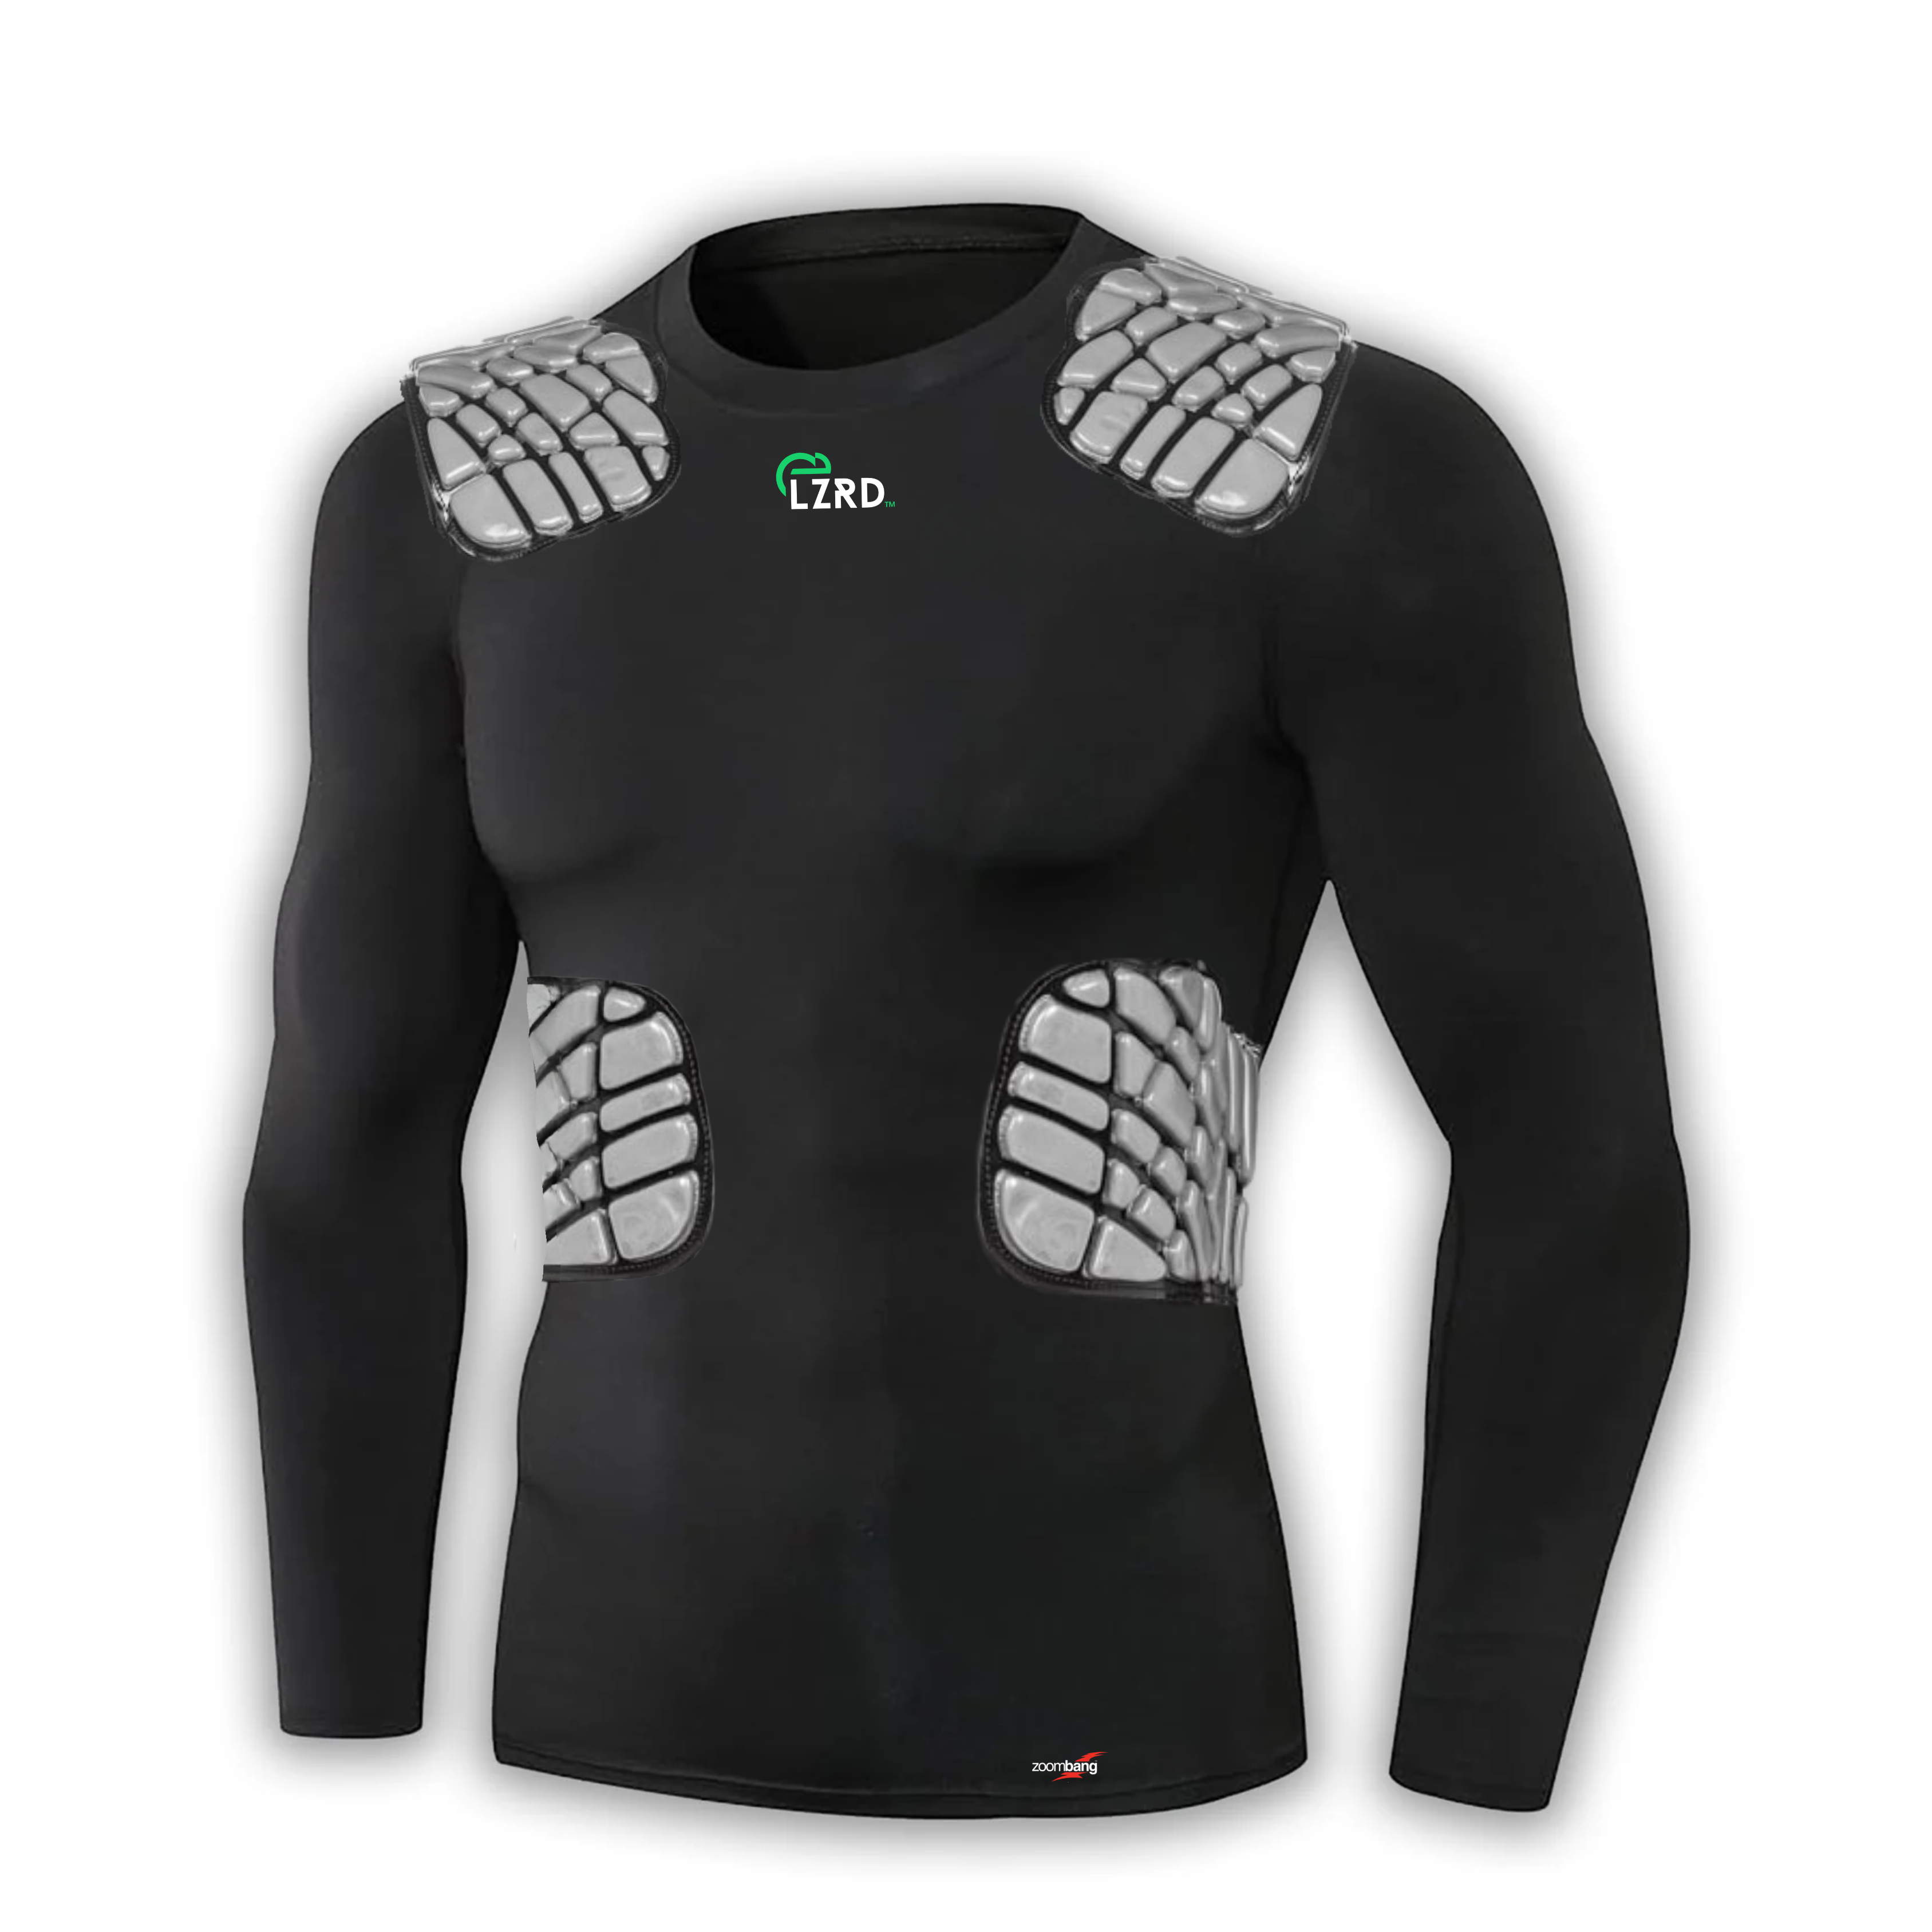 LZRD Padded Compression Grip Shirt - powered by Zoombang